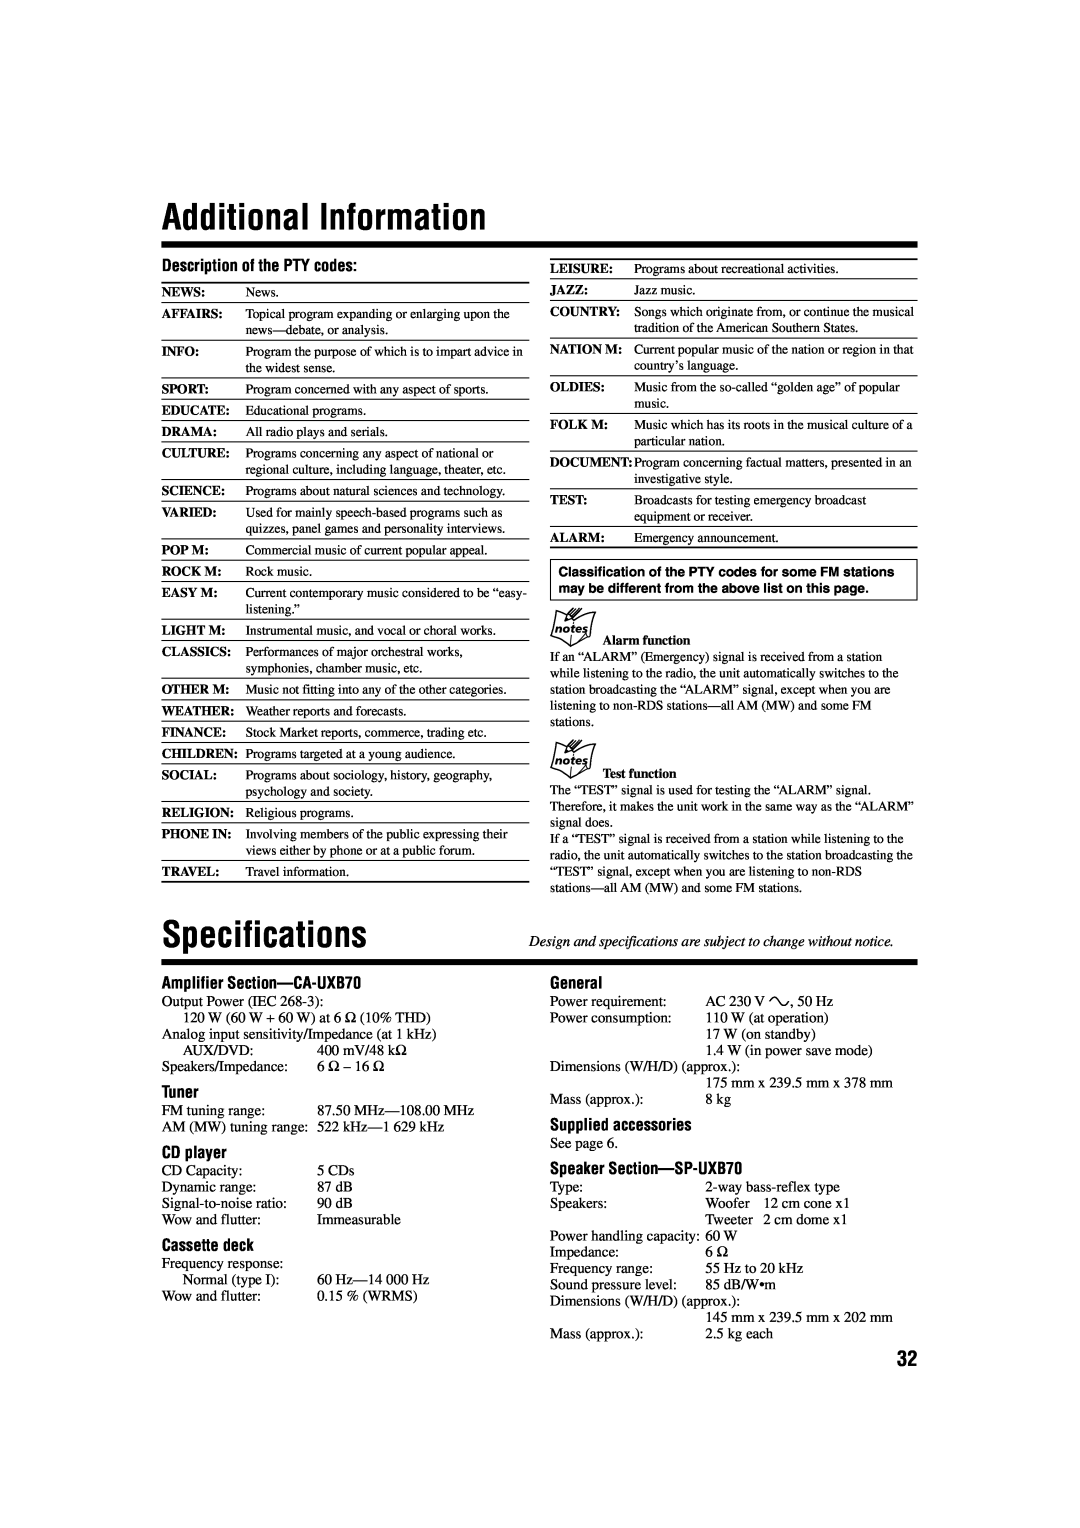 JVC SP-UXB70 manual Additional Information, Specifications, Description of the PTY codes, Amplifier Section-CA-UXB70, Tuner 